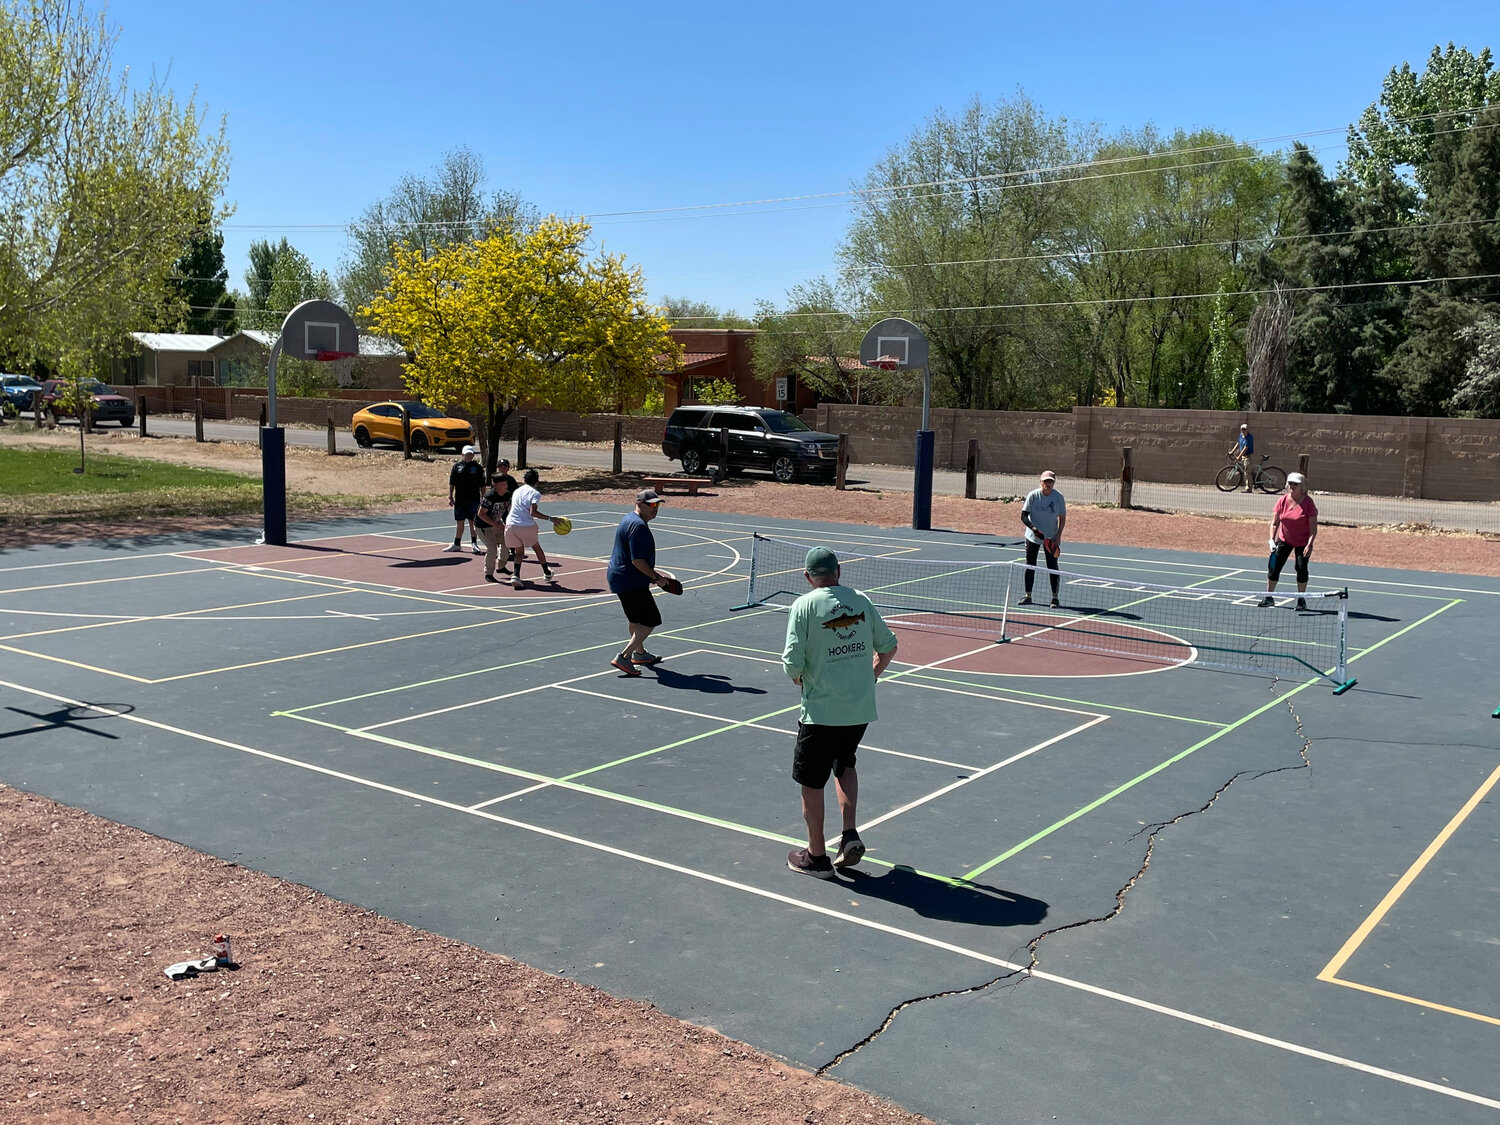 Adults played pickleball while kids played basketball during the recreation fair in Corrales on April 30. (T.S. Last/Corrales Comment)